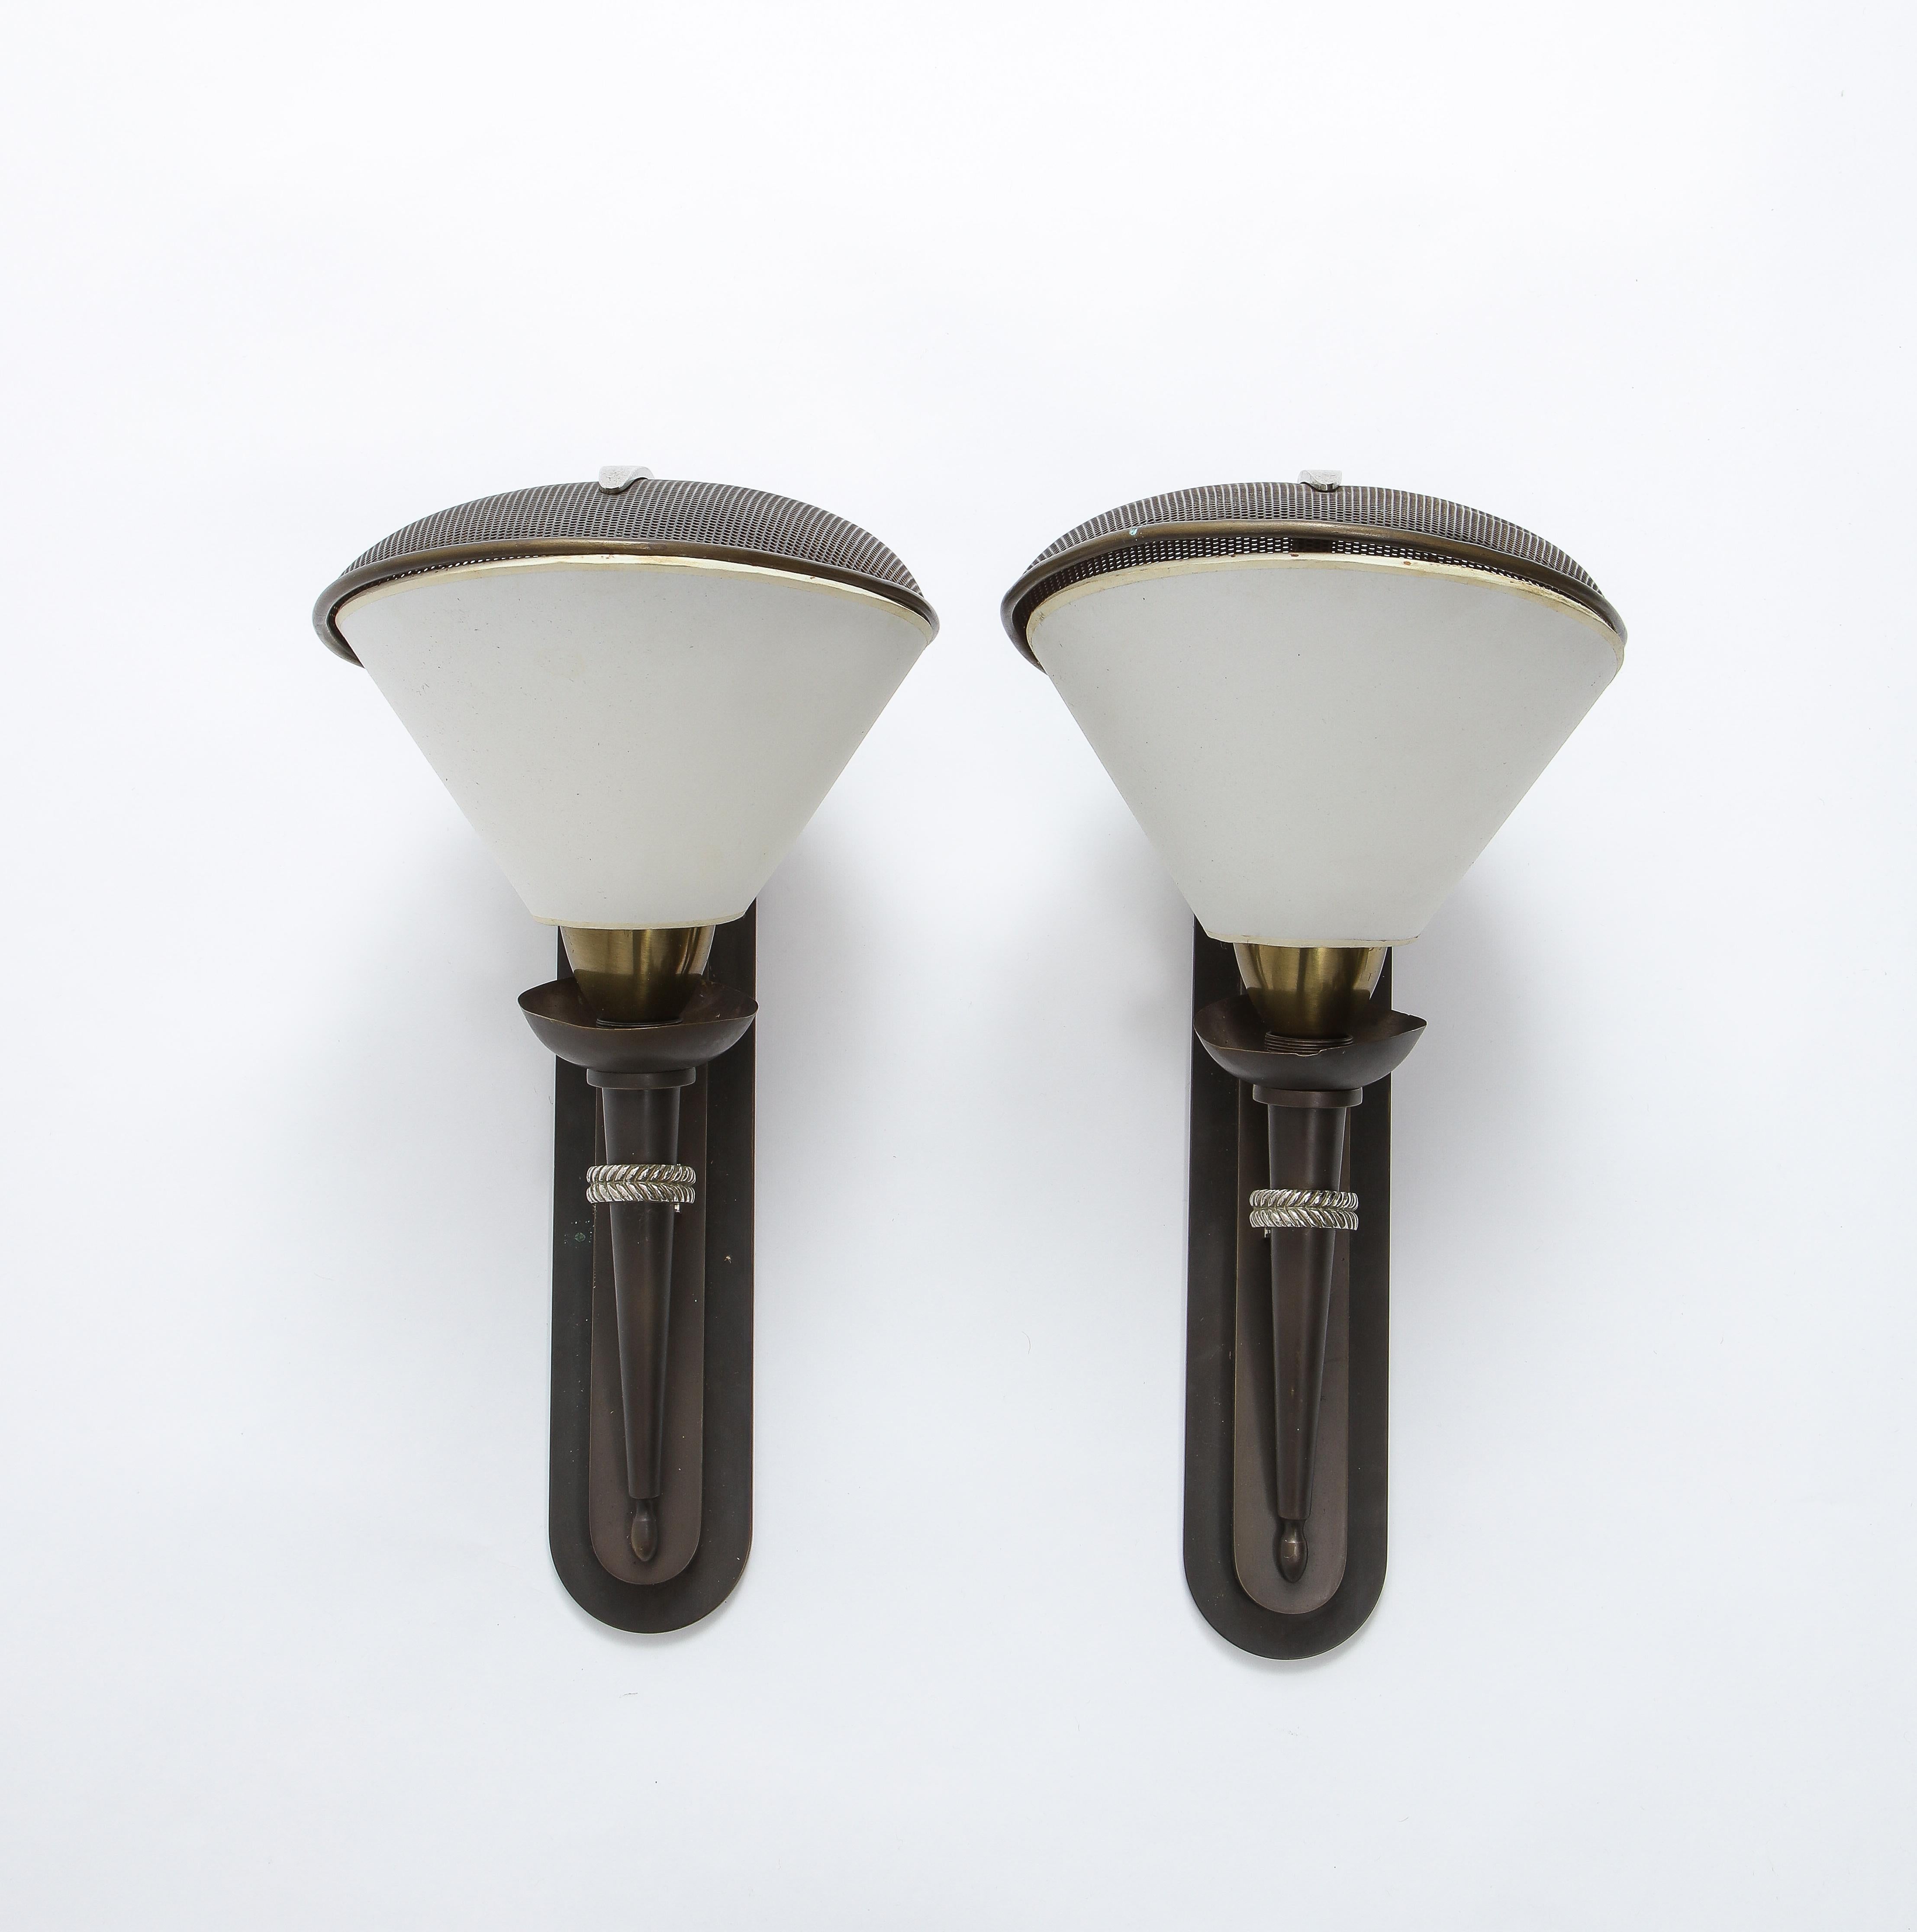 Elegant pair of sconces by Jansen, entirely made of bronze and finished in a rich brown patina with silver accents. These sconces are a classic example of French post-Art Deco design of the 1950s. The top is reminiscent of a fencing face mask, hence